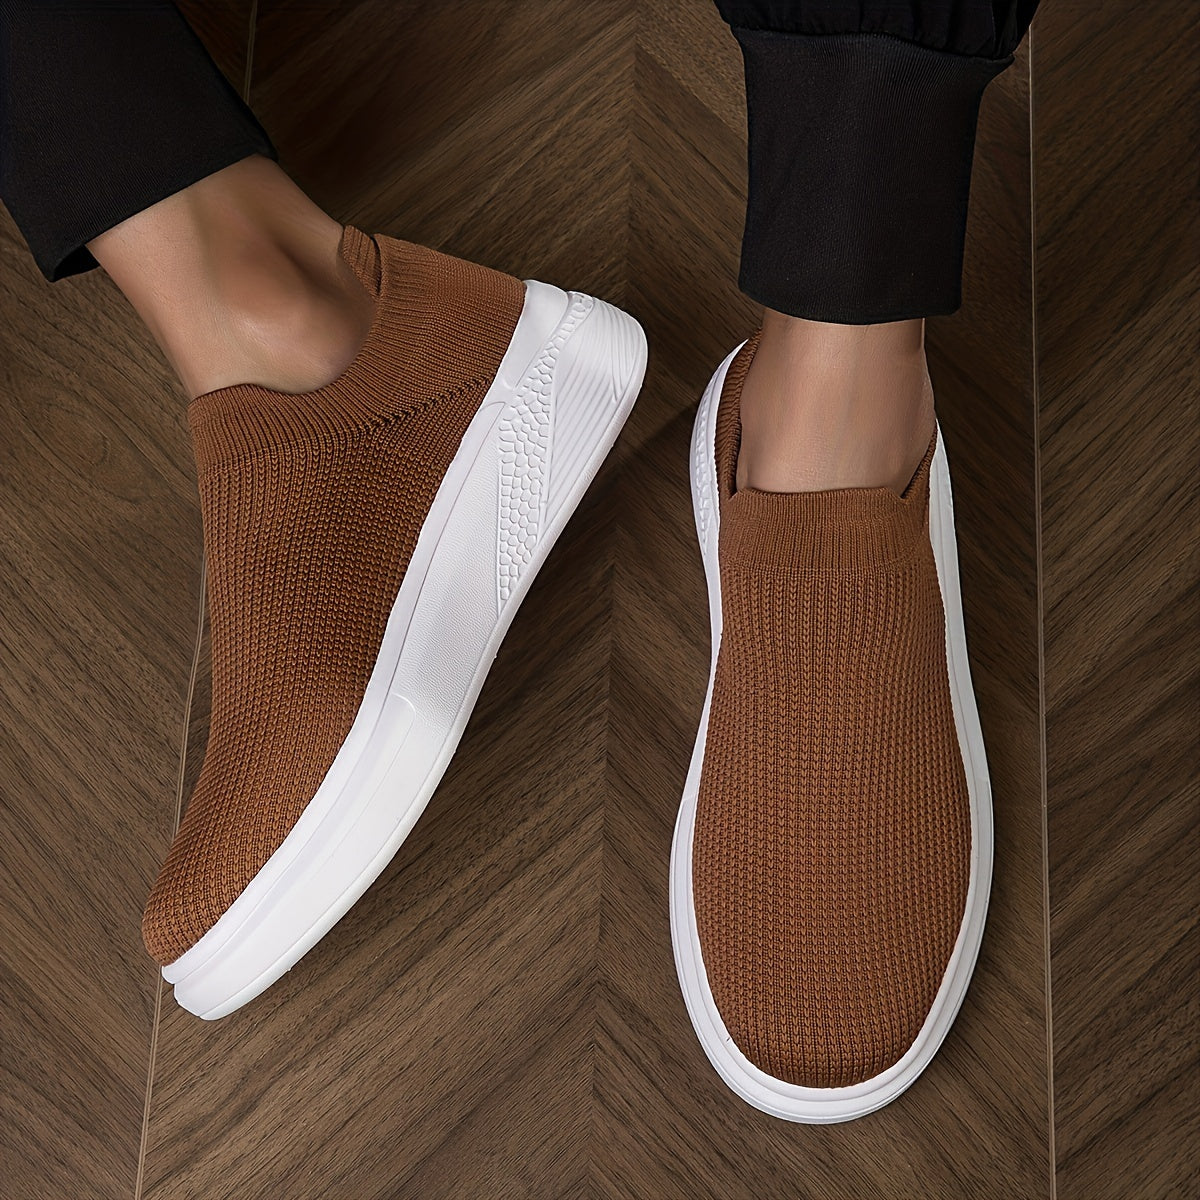 Breathable Lightweight Slip-On Casual Shoes, Spring Summer